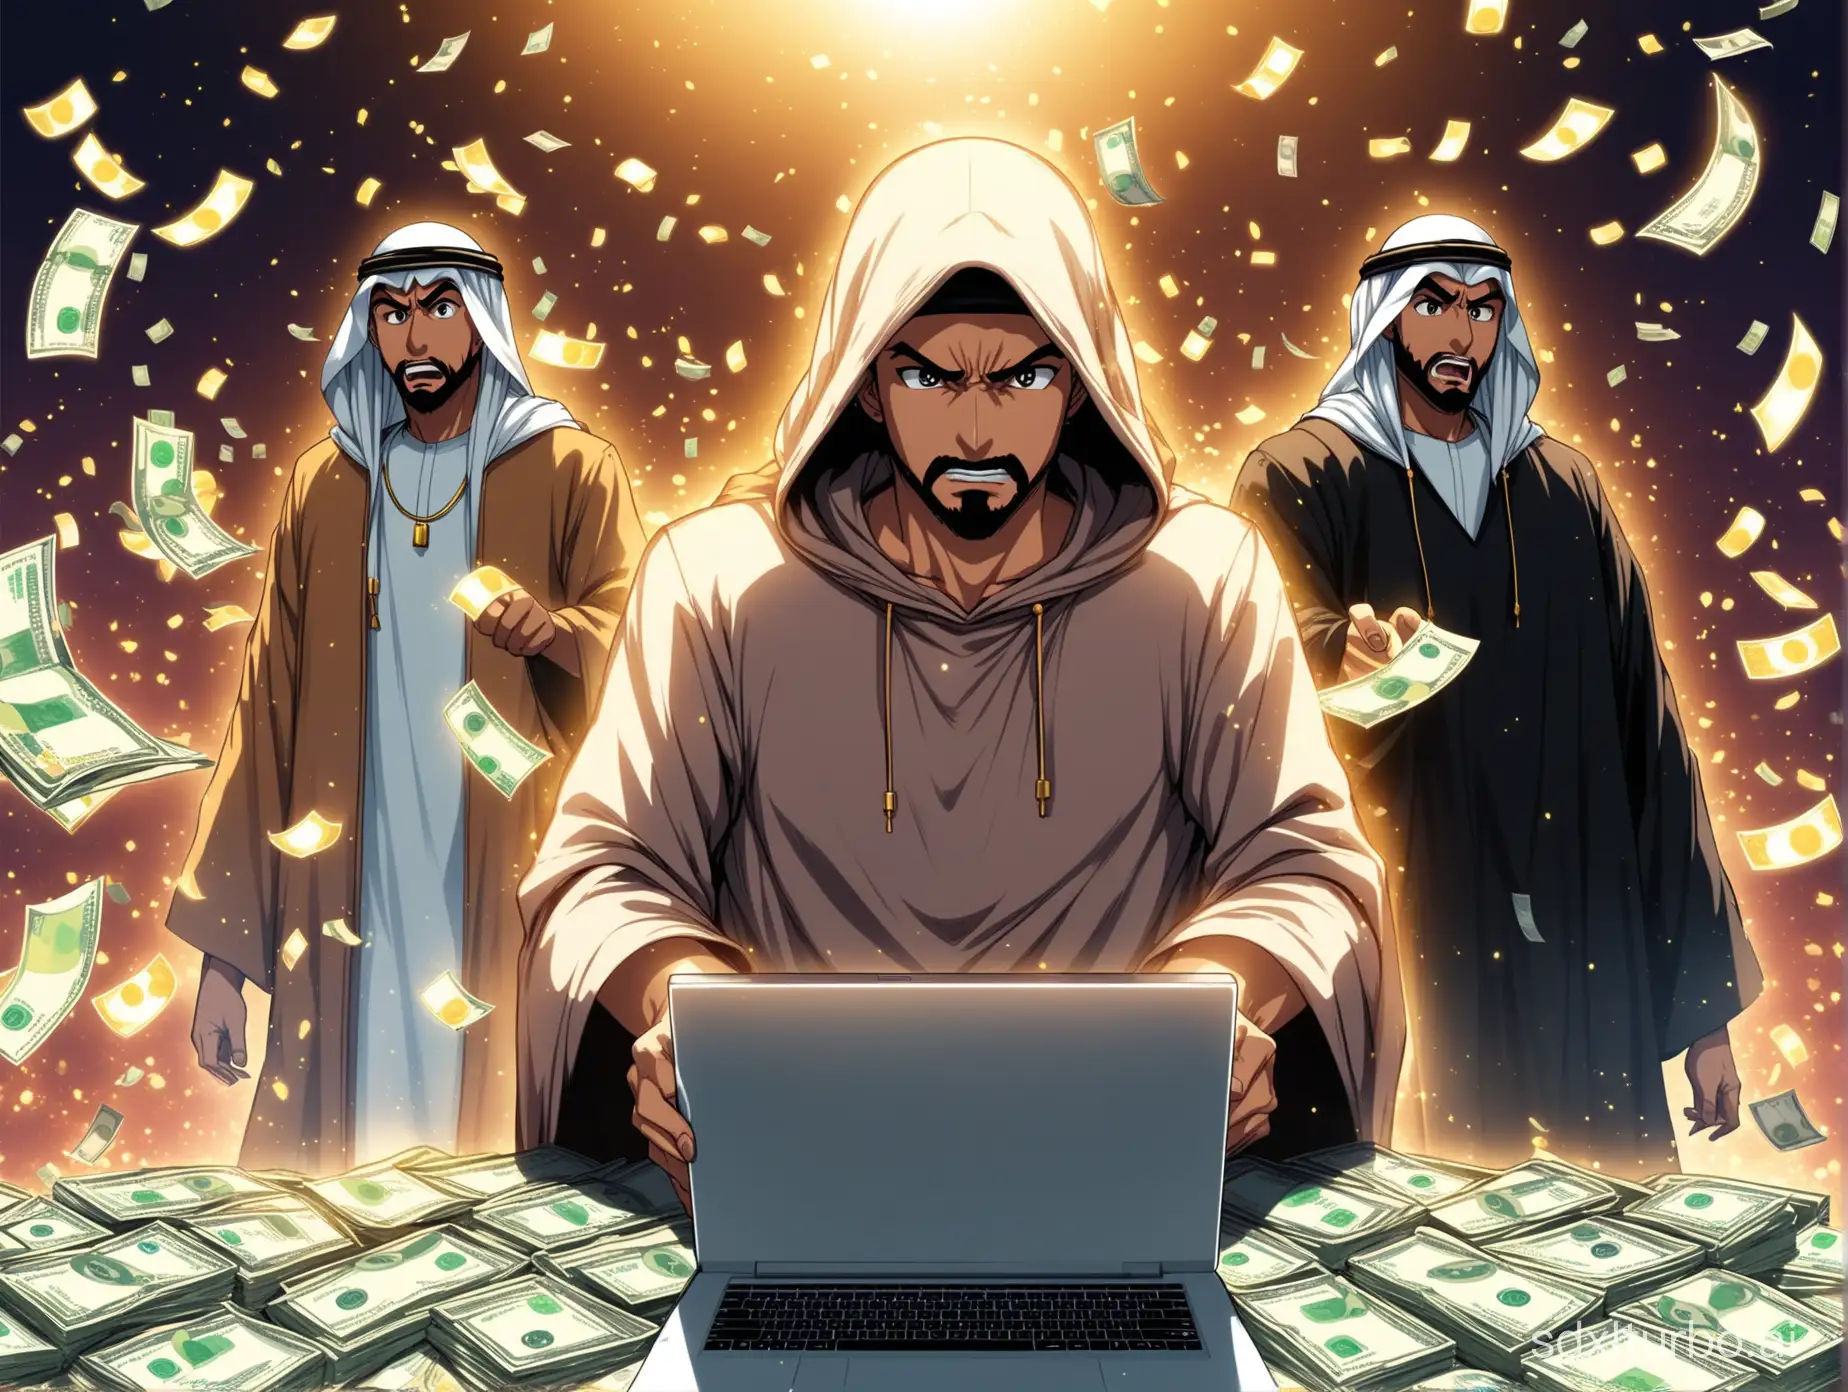 Furious-Arabian-Men-Scammed-by-Hooded-Laptop-Scammer-Money-Scattered-Anime-Style